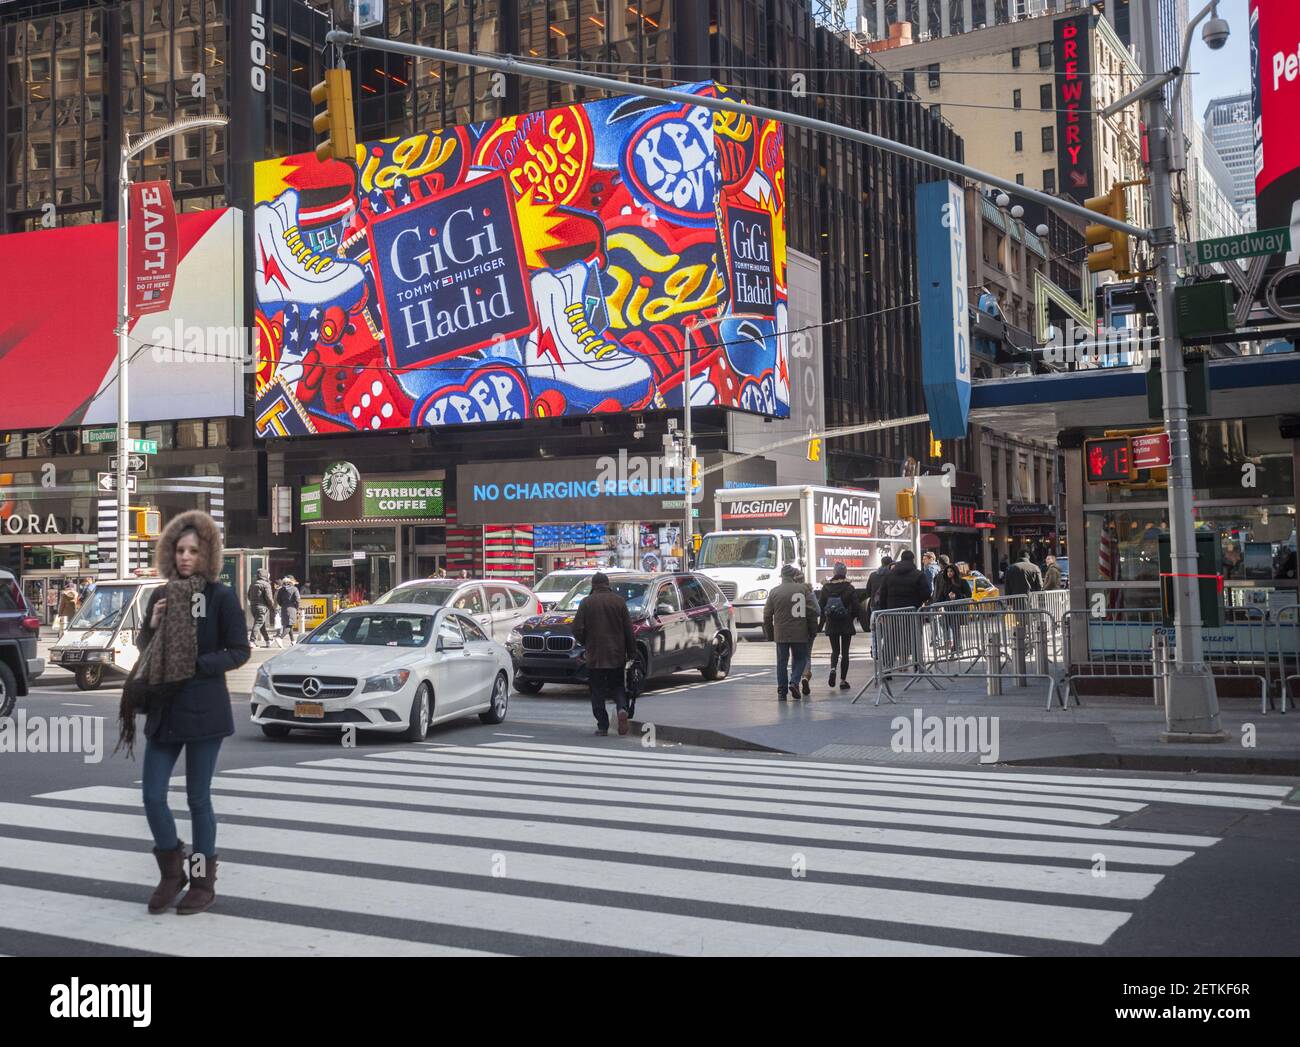 Pedestrians cross Broadway in Times Square in New York on Thursday,  February 16, 2017 in front of an advertisement for the Tommy Hilfiger/Gigi  Hadid collaboration. PVH, the owner of the Tommy Hilfiger